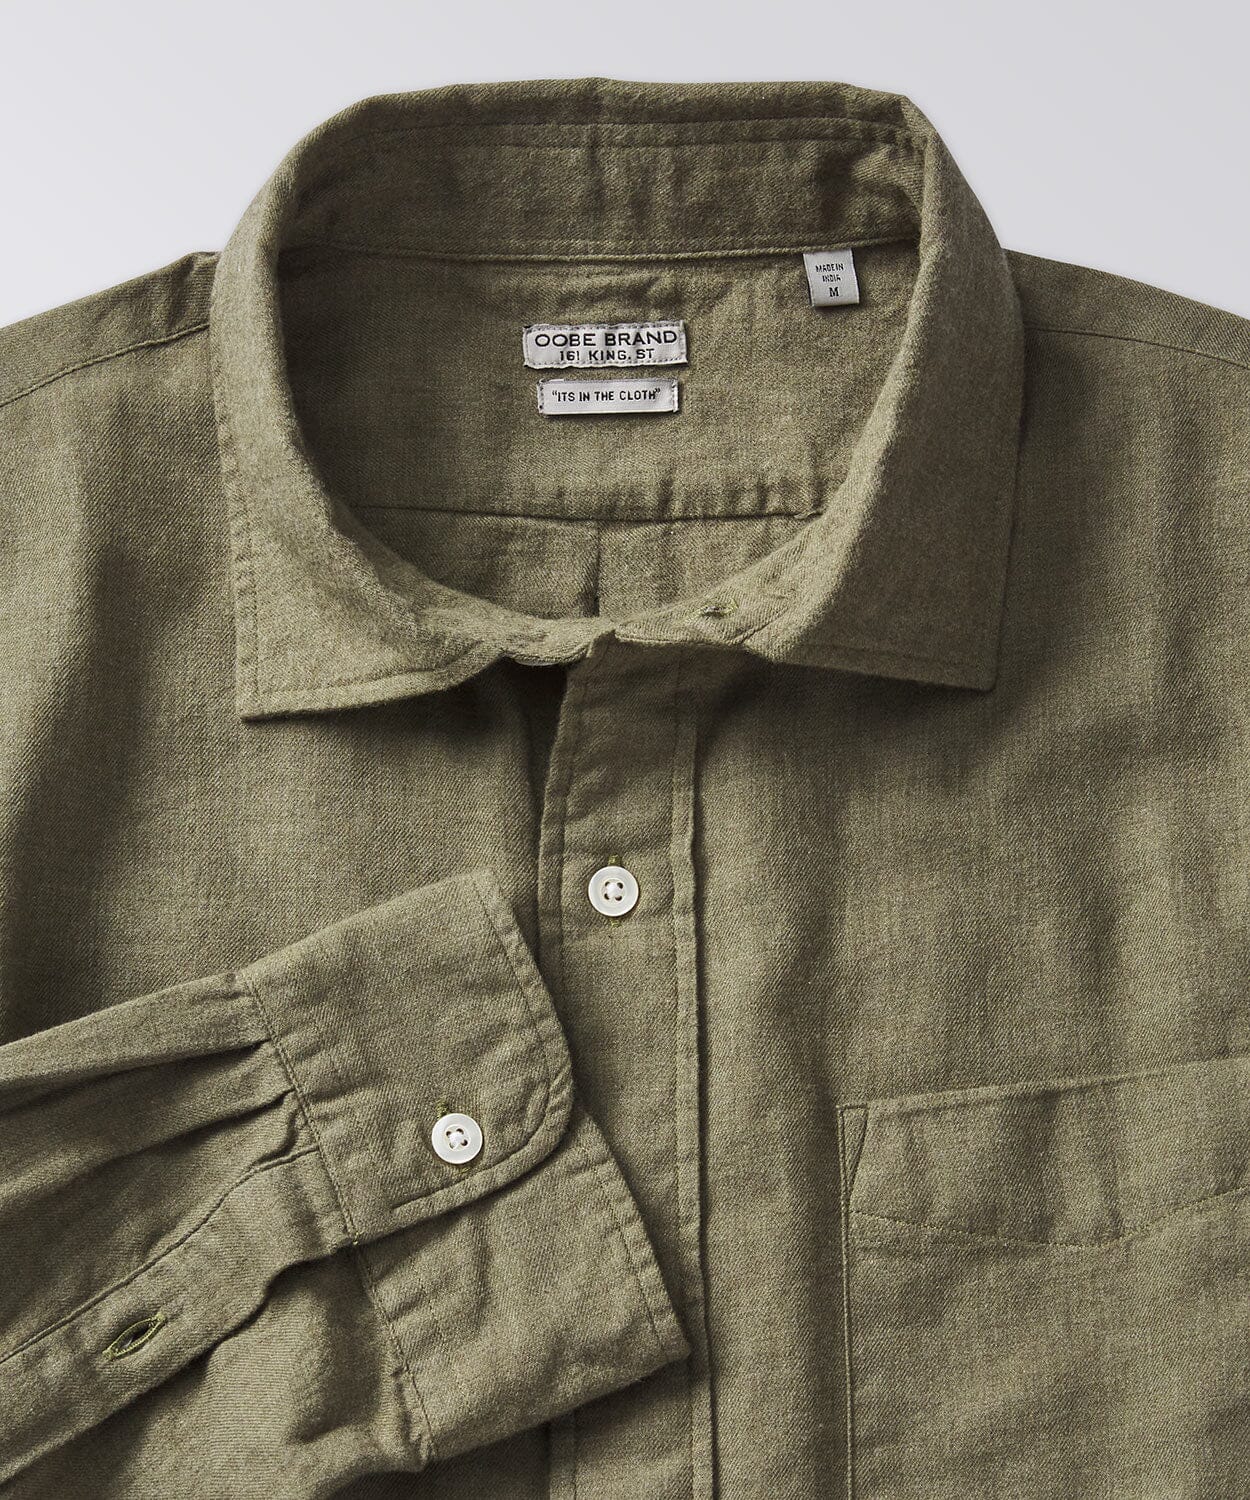 Excella Brushed Heather Solid Shirt Button Downs OOBE BRAND 